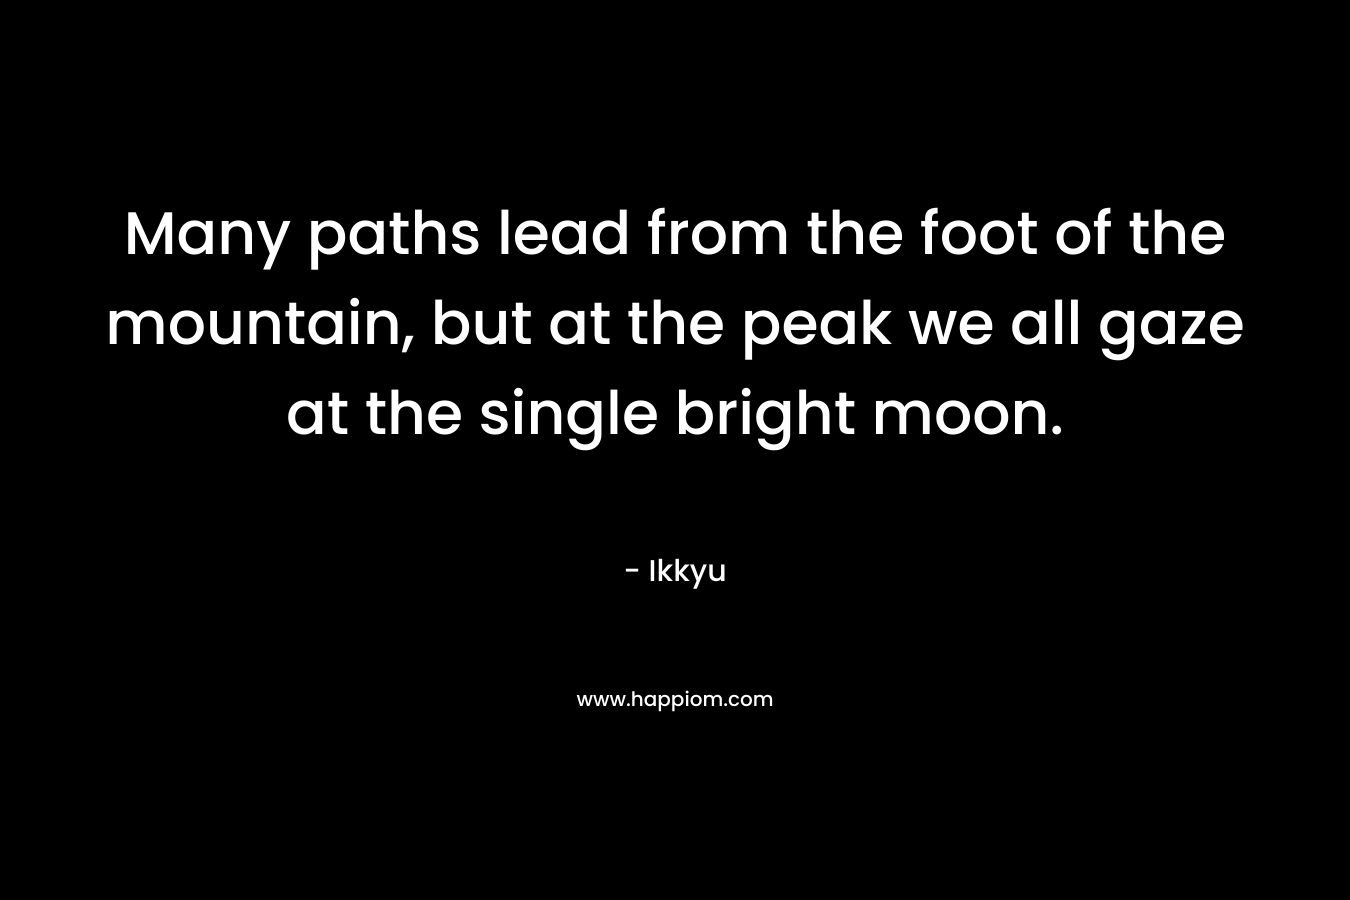 Many paths lead from the foot of the mountain, but at the peak we all gaze at the single bright moon. – Ikkyu